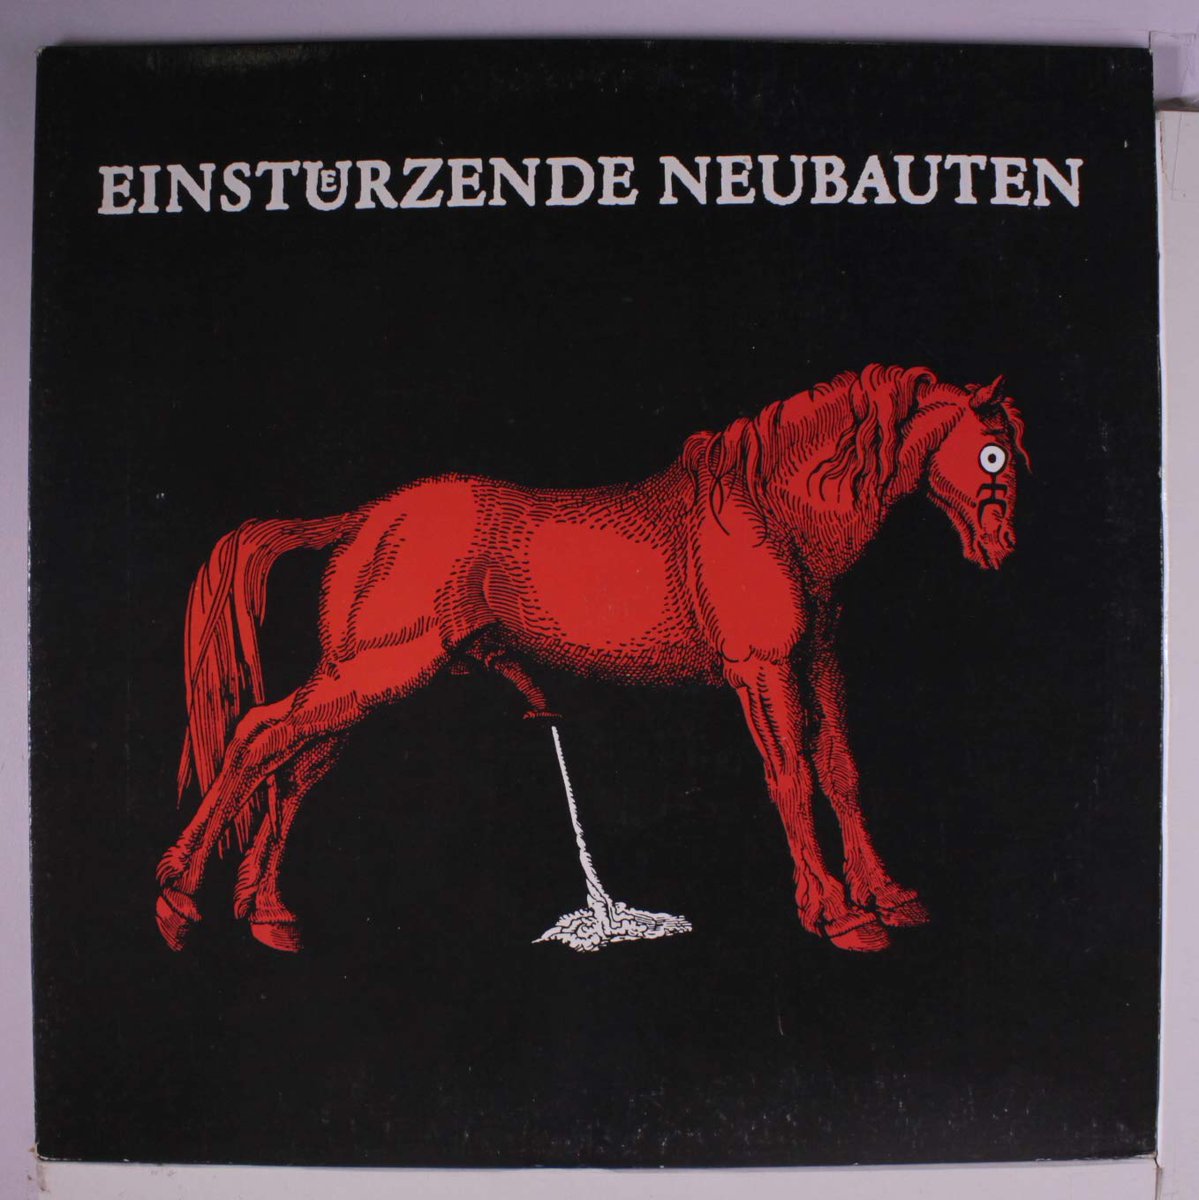 EINSTÜRZENDE NEUBAUTENHaus der Lüge(1989)Five albums in and EN is really starting to settle down. Opening track "Prolog" is basically a spoken word piece with some glitchy noise interludes. "Feurio!" basically finds them kind of treading the waters of the dancefloor.